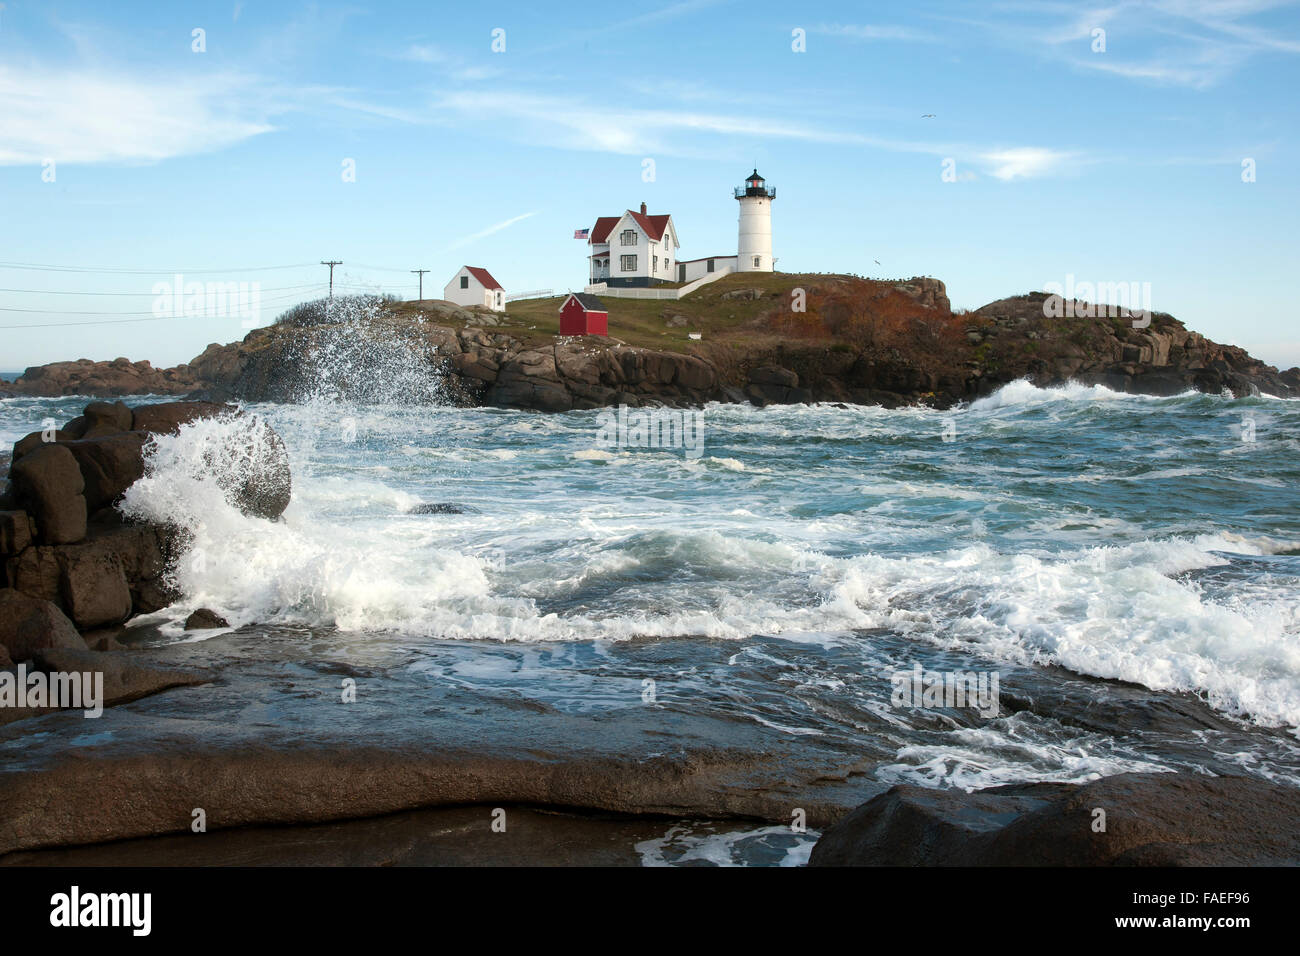 High tide surrounds the nubble island of Cape Neddick lighthouse in southern Maine as waves break over rocky coast. Stock Photo